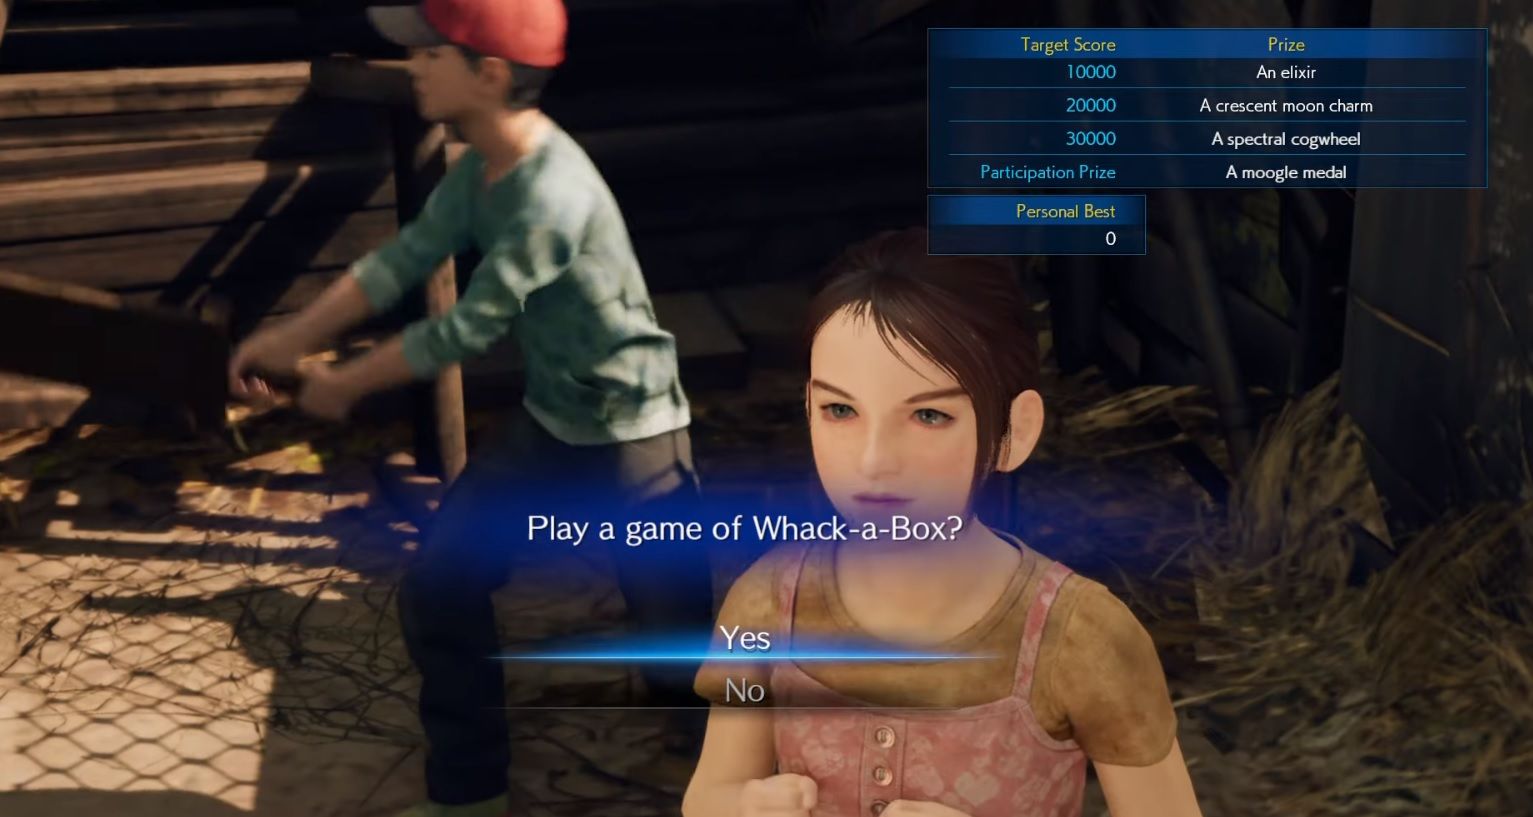 ff7 remake whack a box game for medals